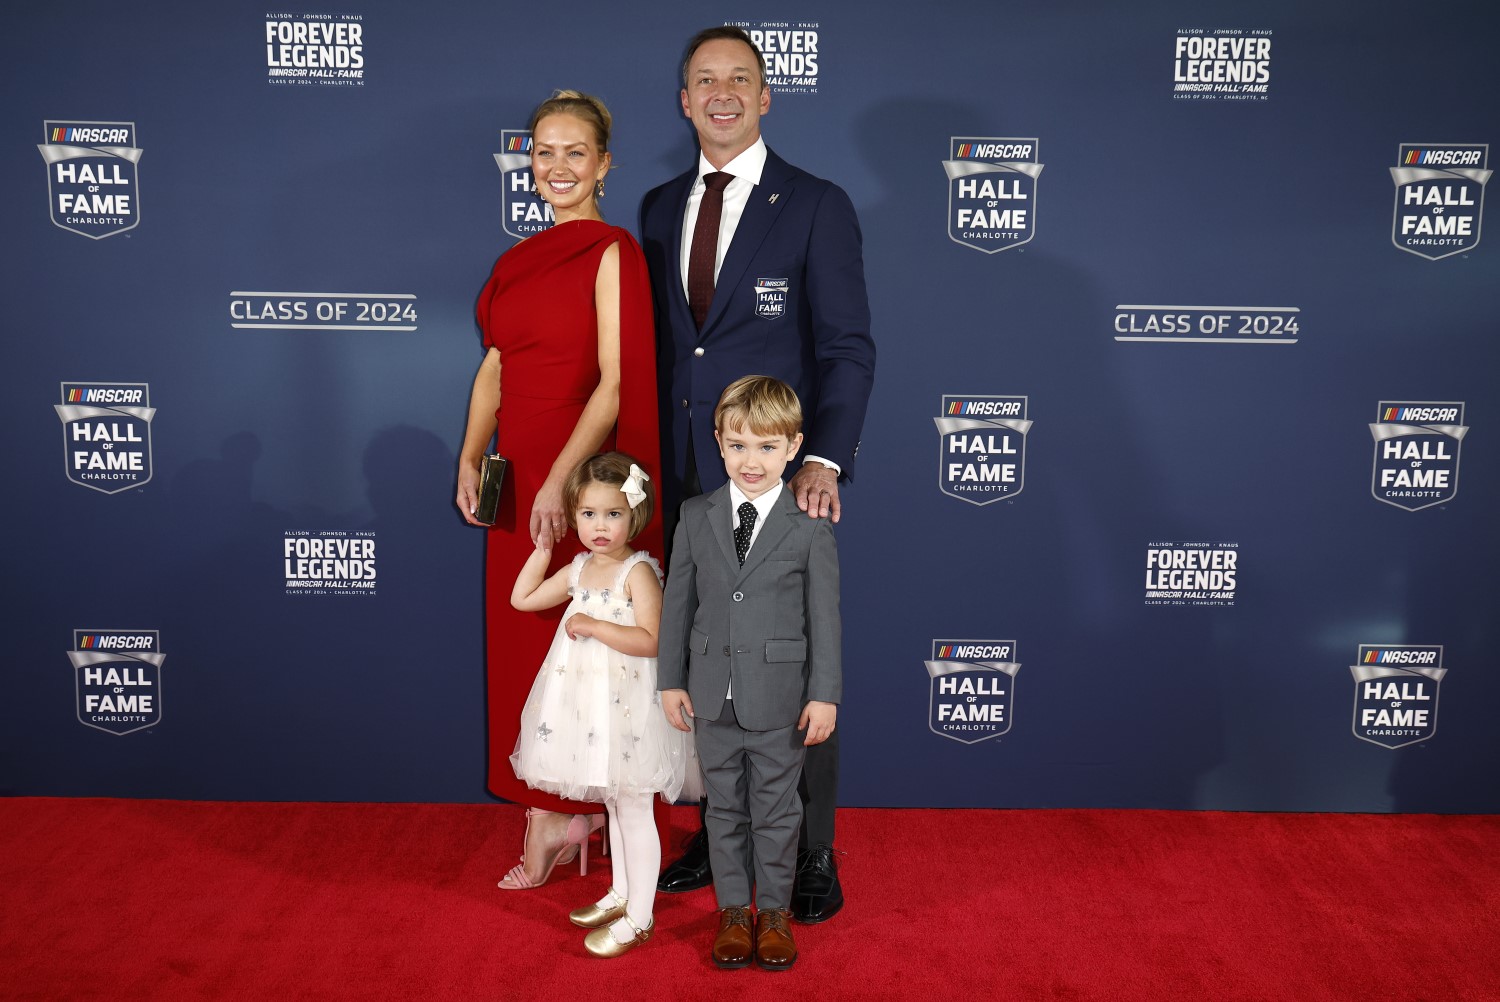 NASCAR Hall of Fame inductee Chad Knaus, son, Kipling Knaus, daughter, Vivienne Mae Knaus and wife, Brooke Knaus pose for photos on the red carpet prior to the 2024 NASCAR Hall of Fame Induction Ceremony at Charlotte Convention Center on January 19, 2024 in Charlotte, North Carolina. (Photo by Chris Graythen/Getty Images)